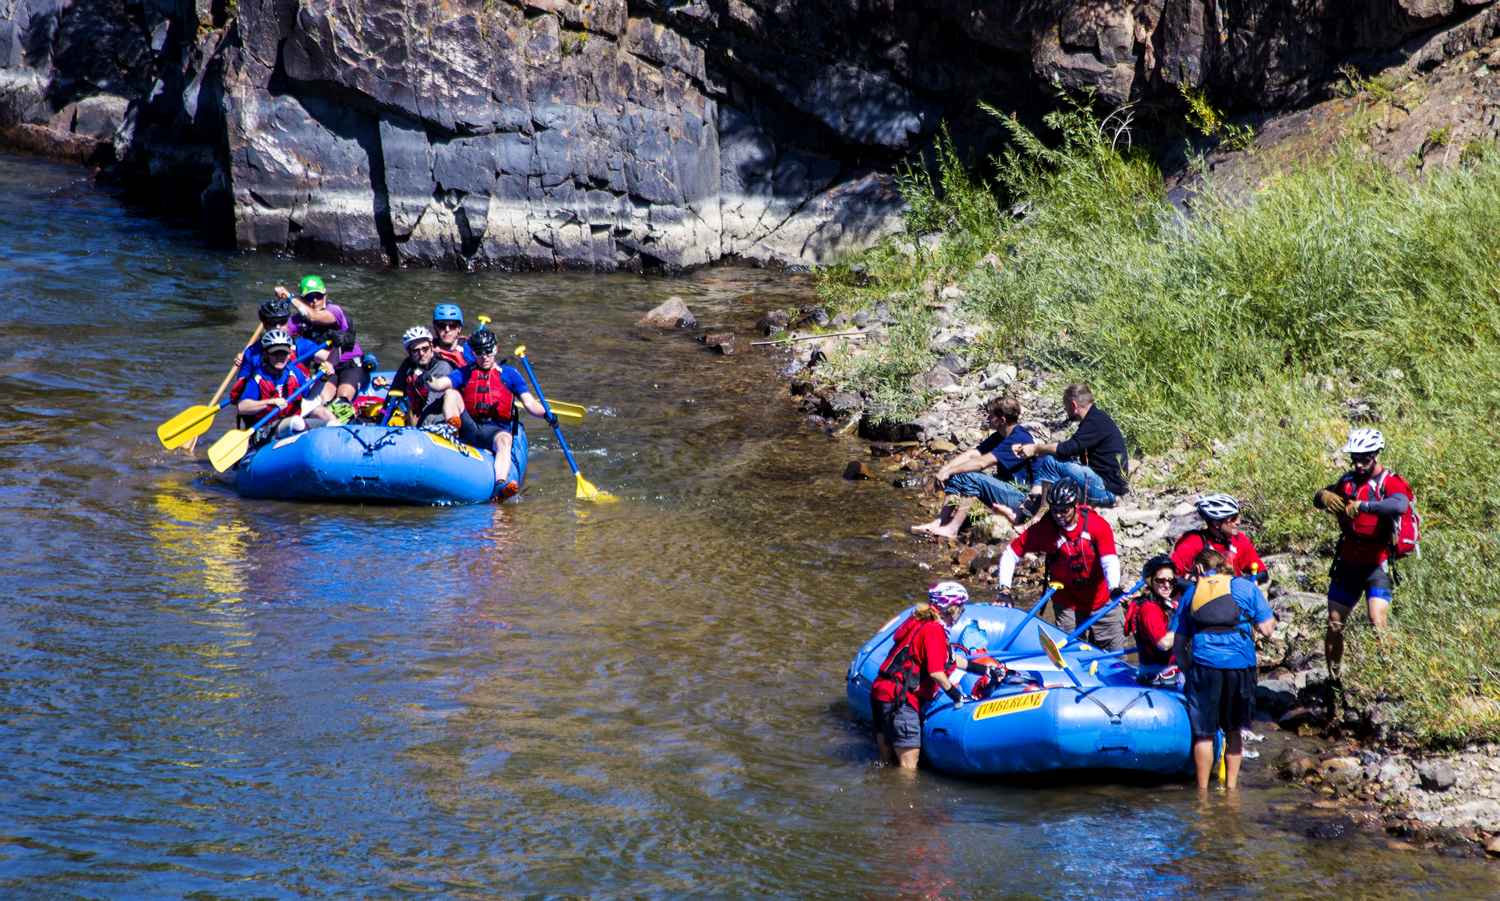 Teams arrive at a check point along the Colorado River during the 2014 Adventure Team Challenge Colorado. Photograph by Chelsea Roberson.